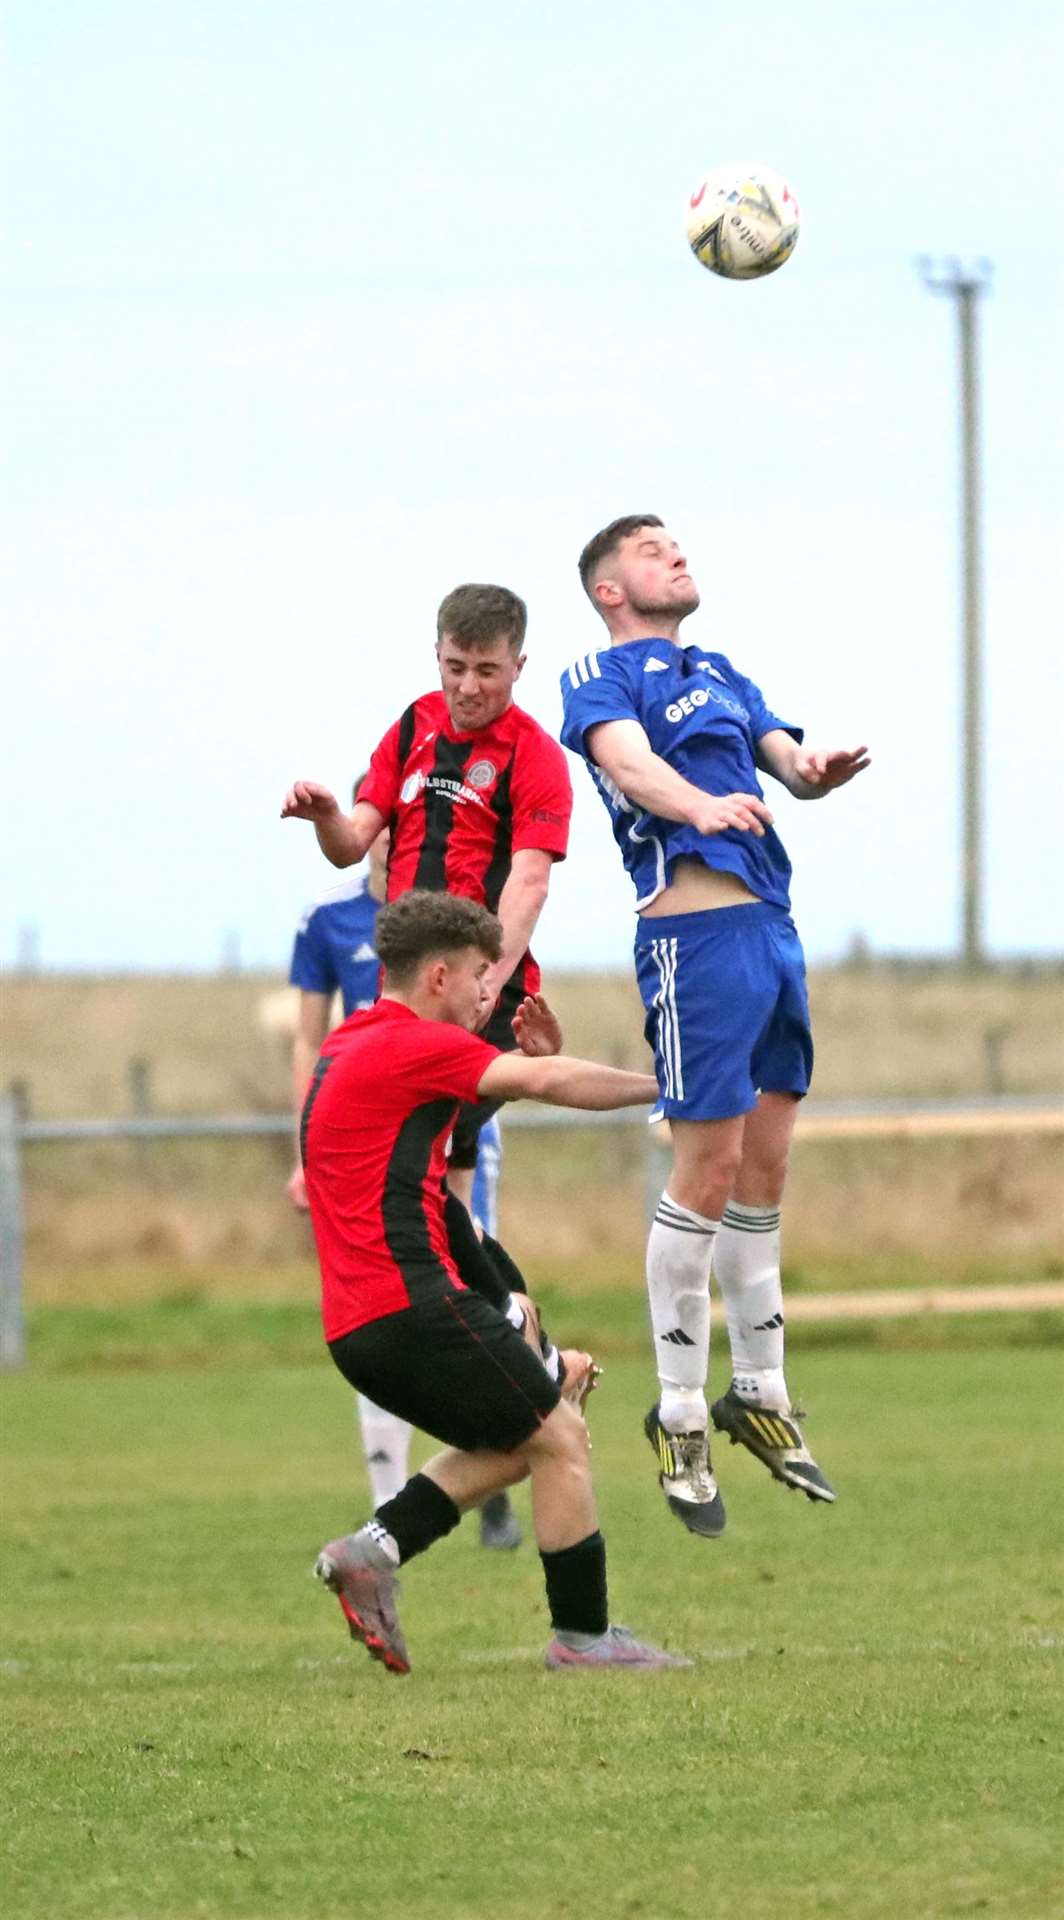 Halkirk United's Grant Aitkenhead competes for a header with Ruaridh Patience of Invergordon. Picture: James Gunn